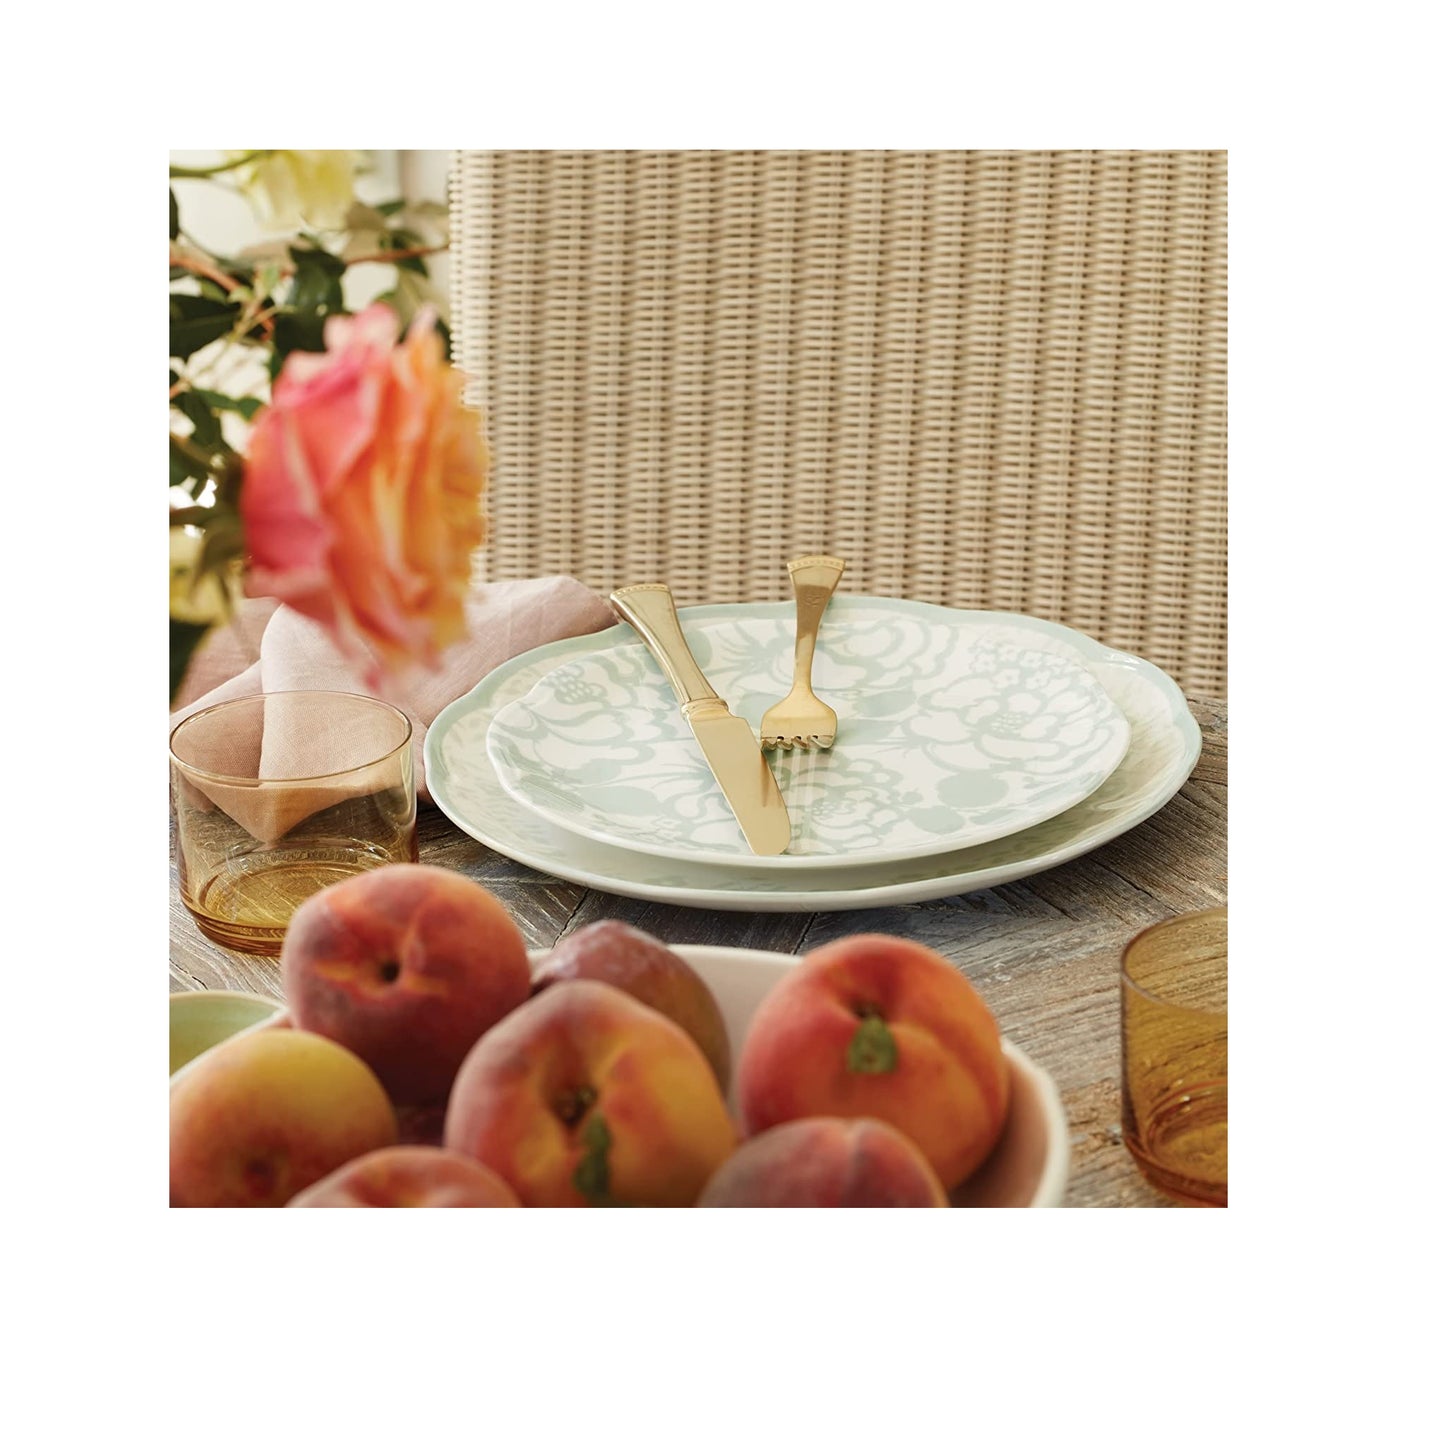 Butterfly Meadow Cottage 4-Piece Dinner Plates By Lenox